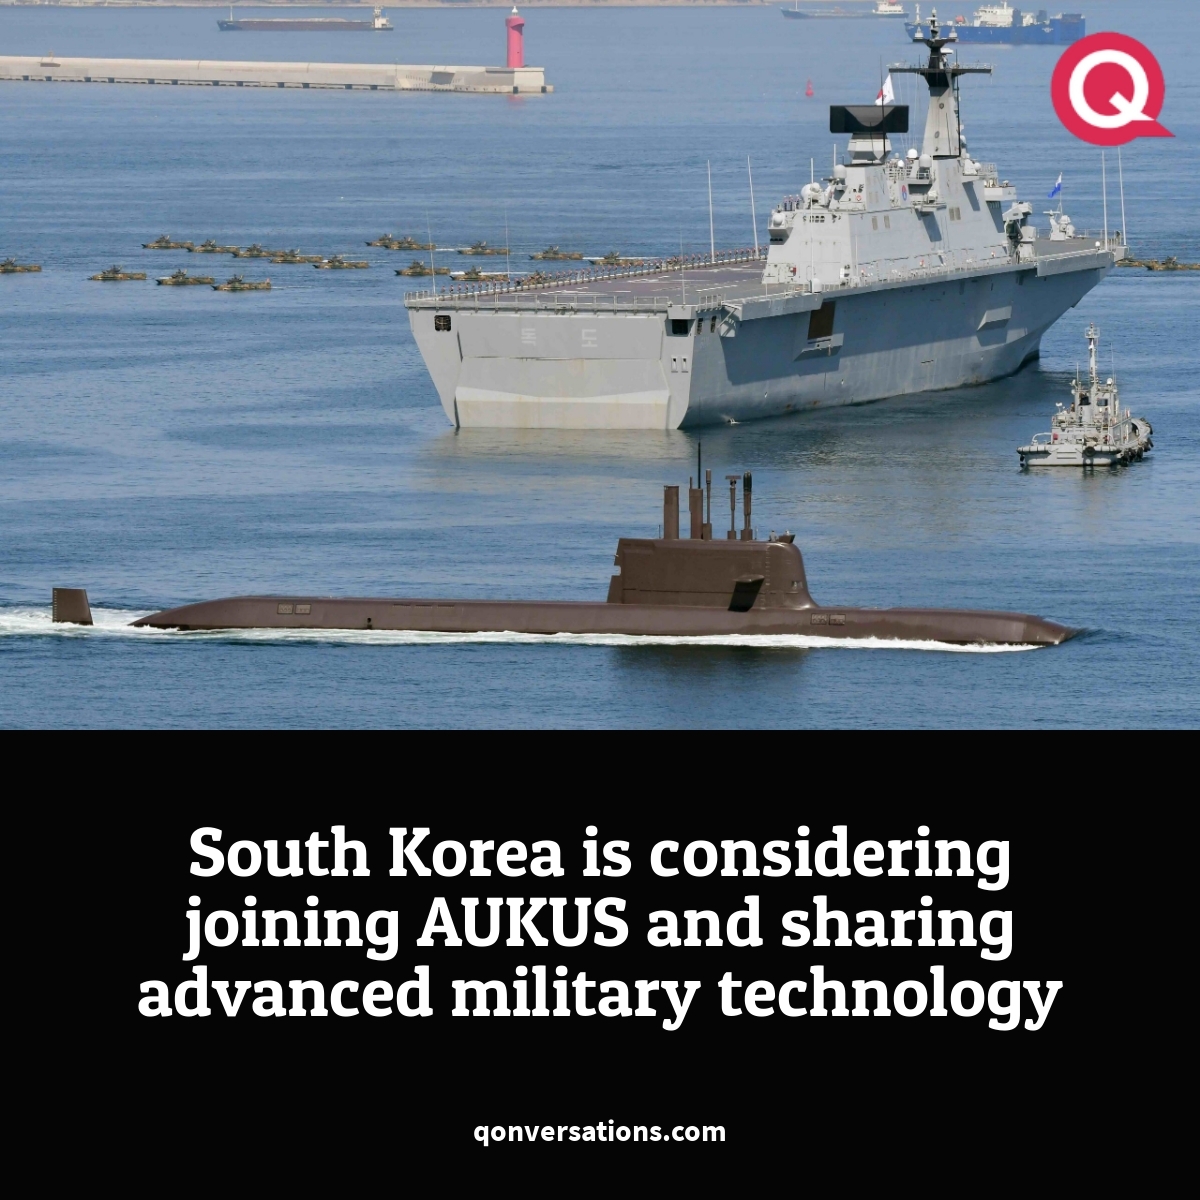 #Military #technews #SouthKorea South Korea is contemplating sharing advanced military technology with the #US, the #UK, and #Australia. Find out why: qonversations.com/south-korea-is…